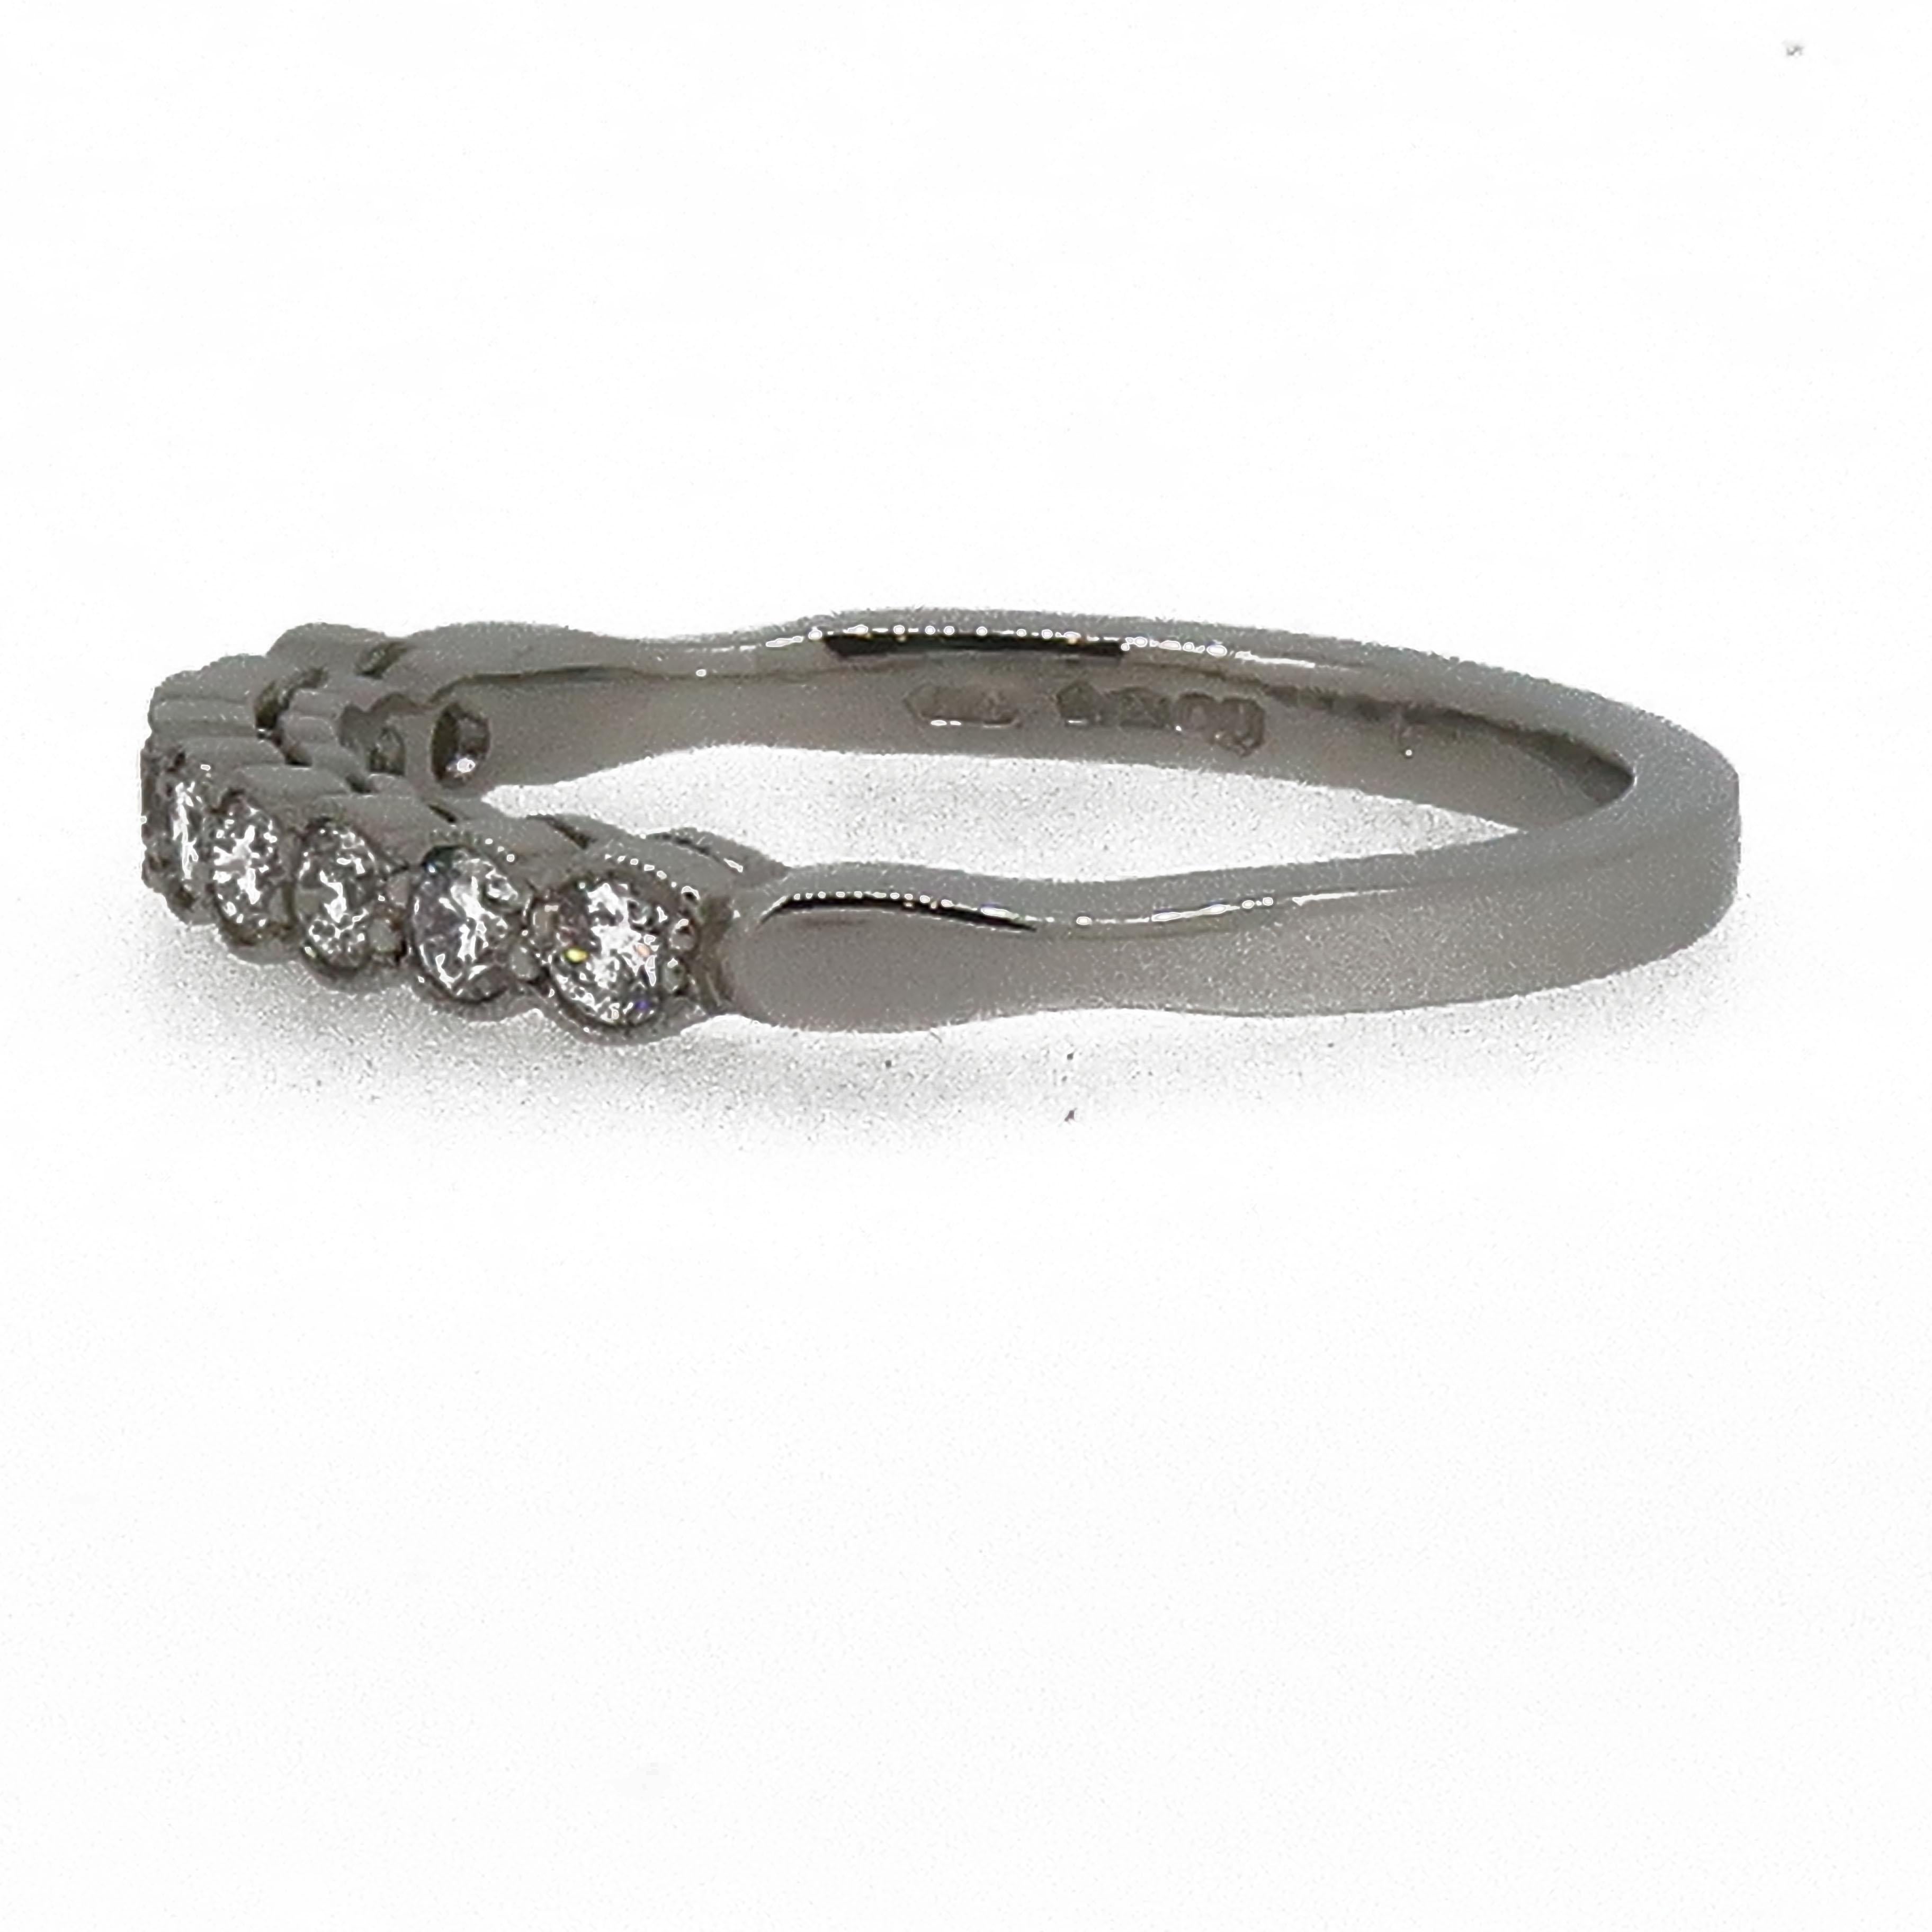 Platinum Diamond Eternity Band Ring

A dainty diamond eternity ring. Consisting of nine white brilliant cut diamonds, weighing 0.30ct in total. Set in a delicate platinum mill-grain setting. It would make the perfect wedding band as its so pretty